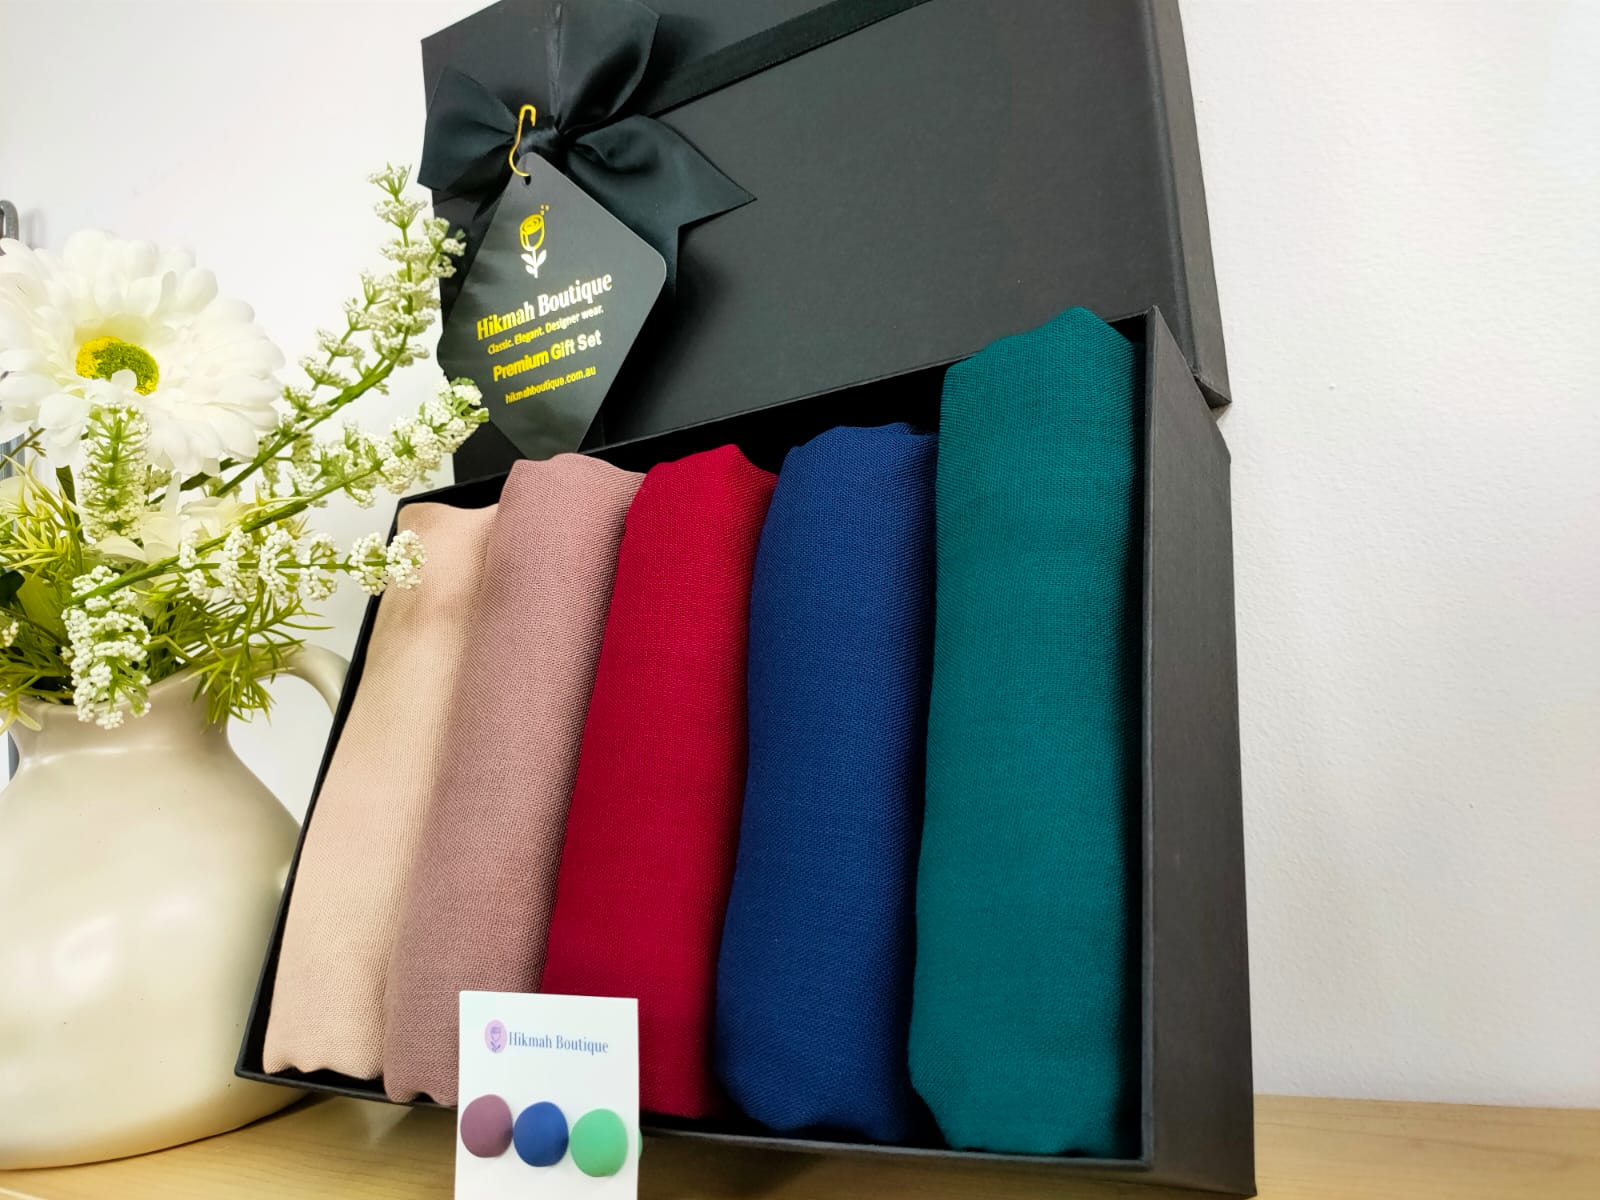 Elevate your gifting experience with our Viscose Hijab Gift Box from the Modest Elegance Range. Handcrafted with care and offering free shipping, our exclusive Islamic gift sets are perfect for Ramadan, Eid, New Hijabi, New Revert and special occasions. Shop now at Hikmah Boutique.